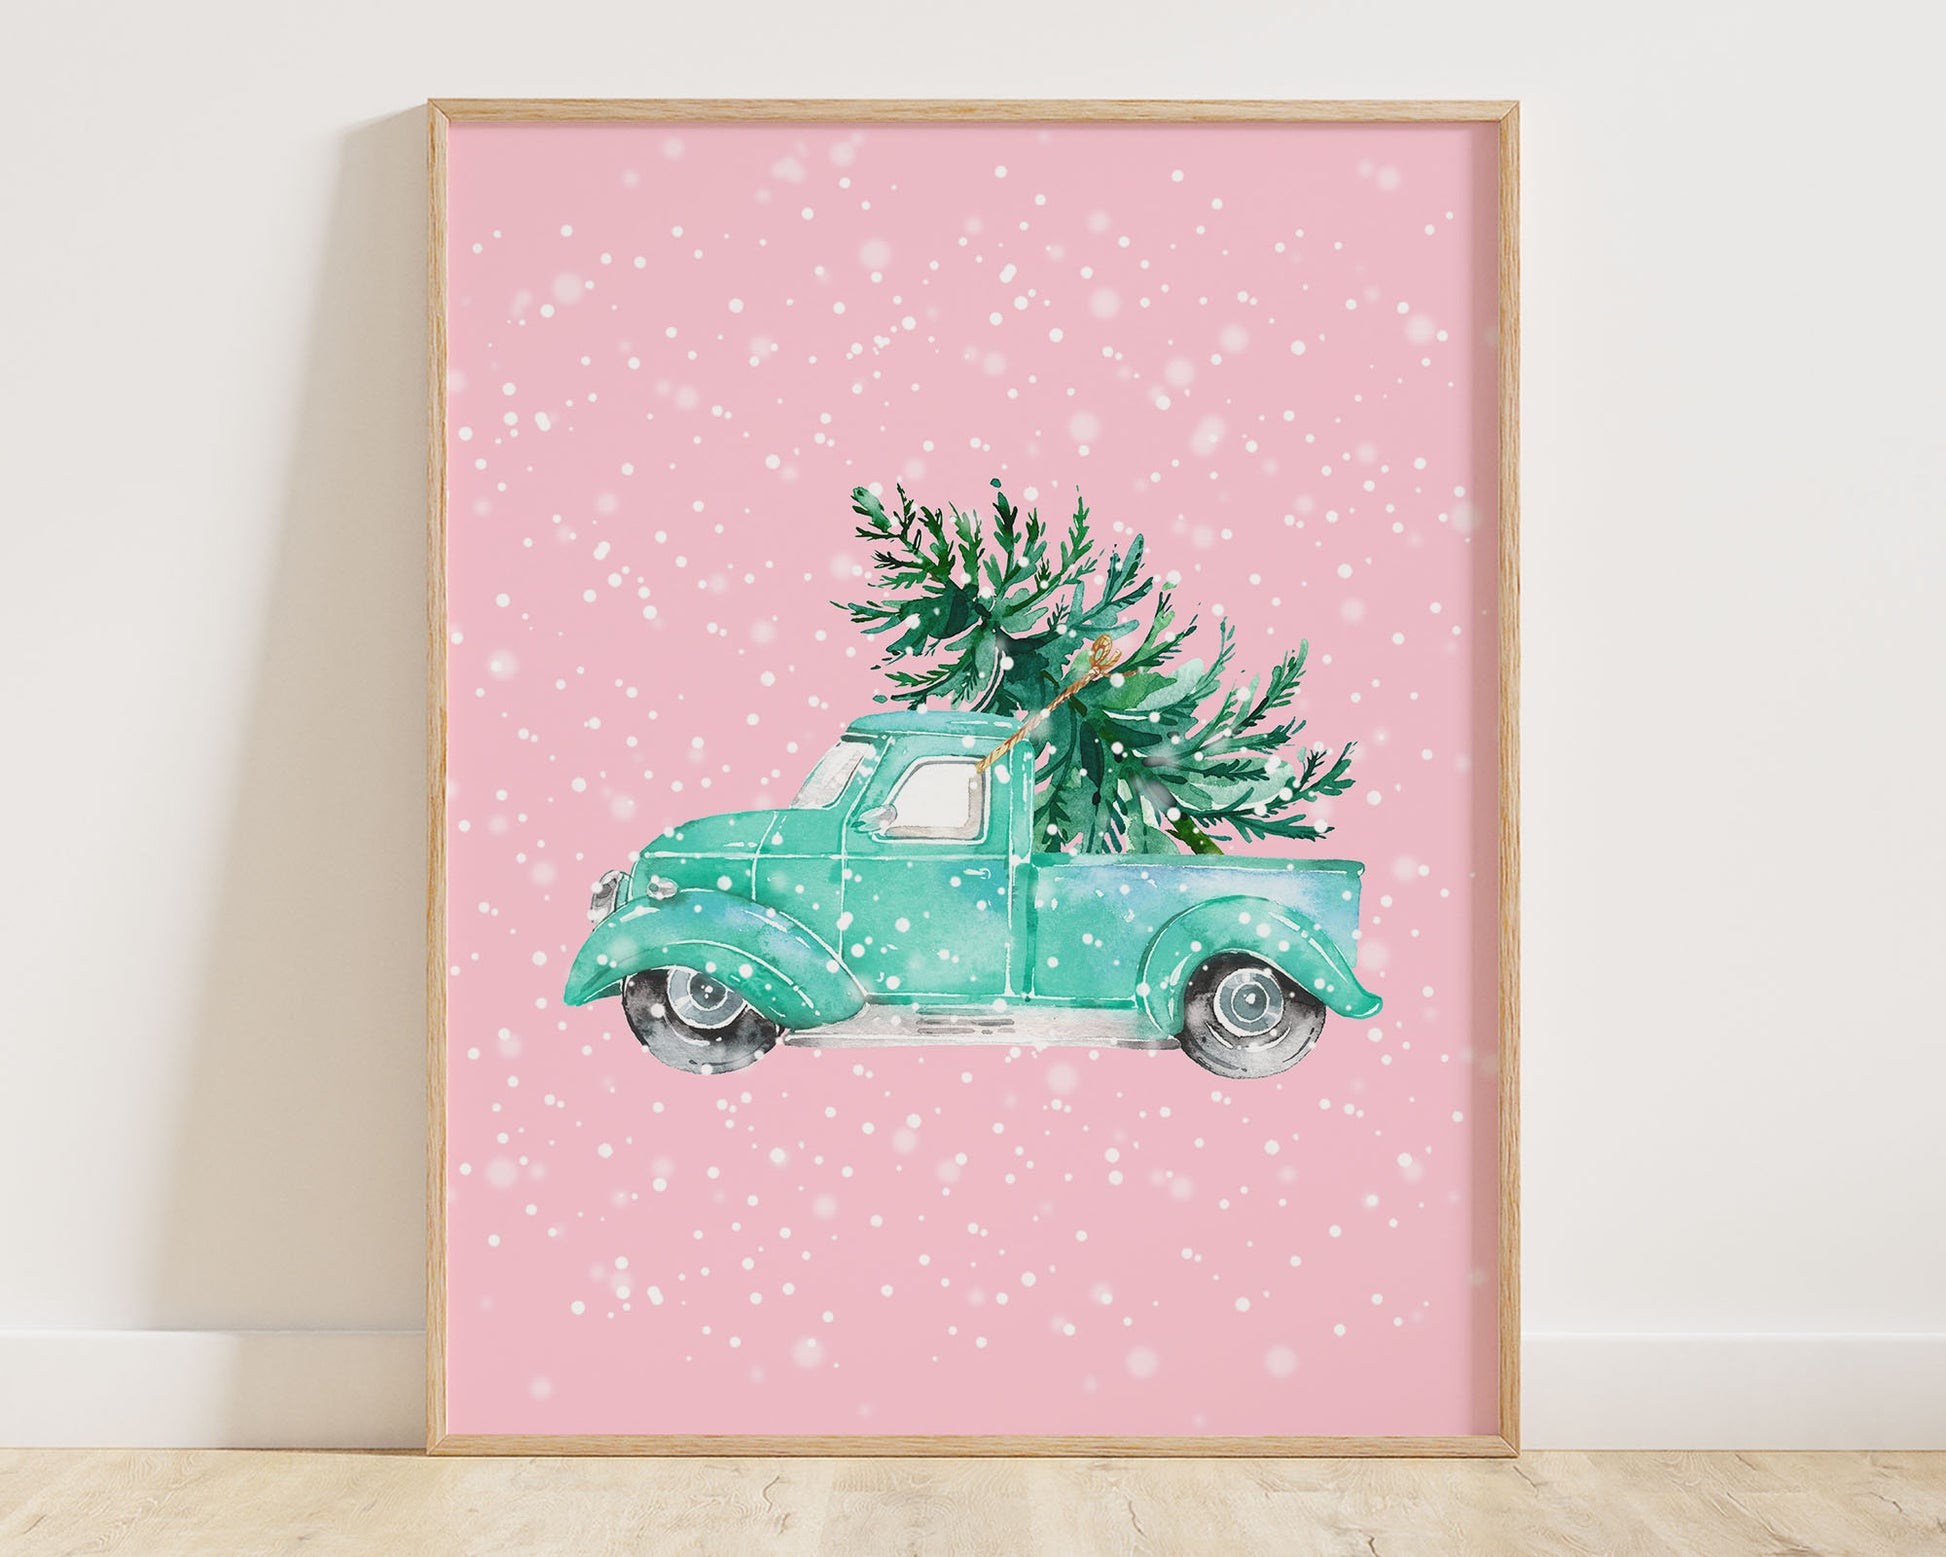 Watercolor Teal / Turquoise Vintage Christmas Truck with Christmas Tree on a pink background with a dreamy snowflake effect. This digital wall print is perfect for decorating bright and retro 1950s - 1960s spaces for a vintage Christmas aesthetic.